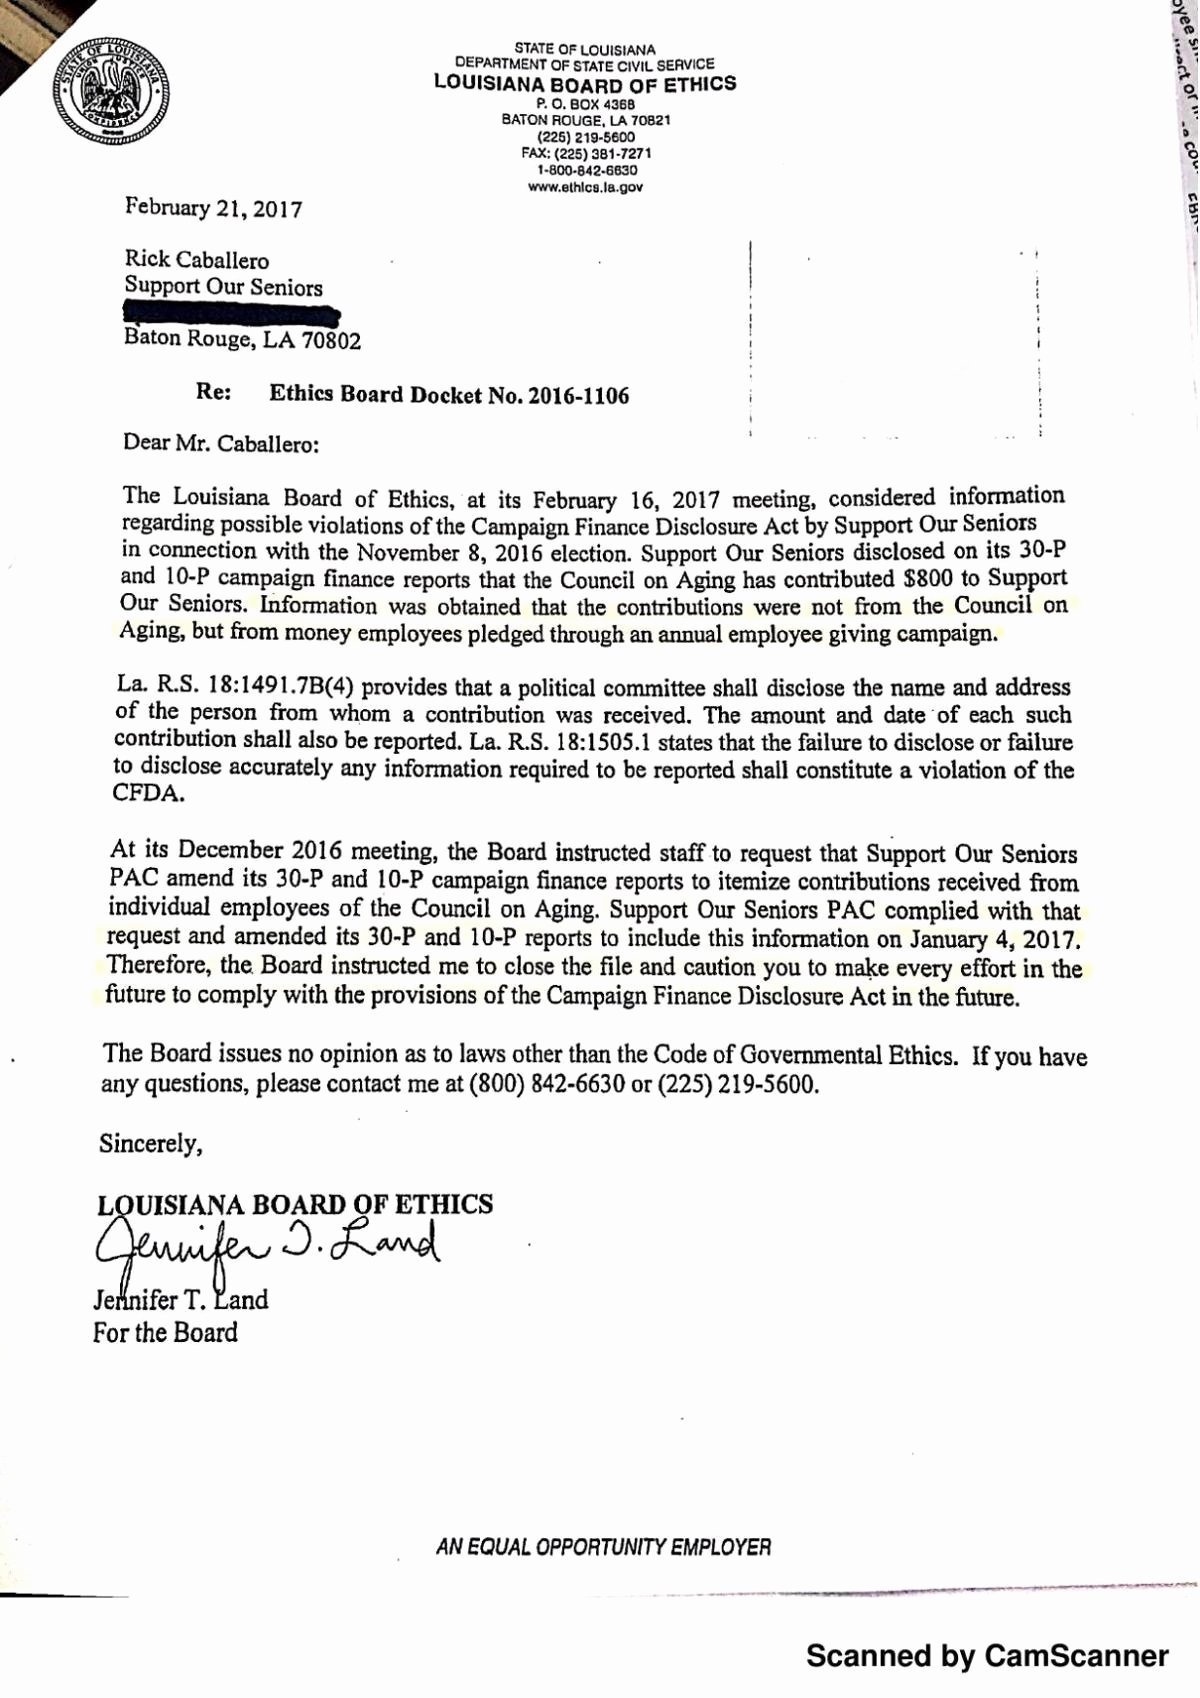 Conflict Of Interest Letter Lovely Council On Aging Board Takes Action to Clean Up Mud D